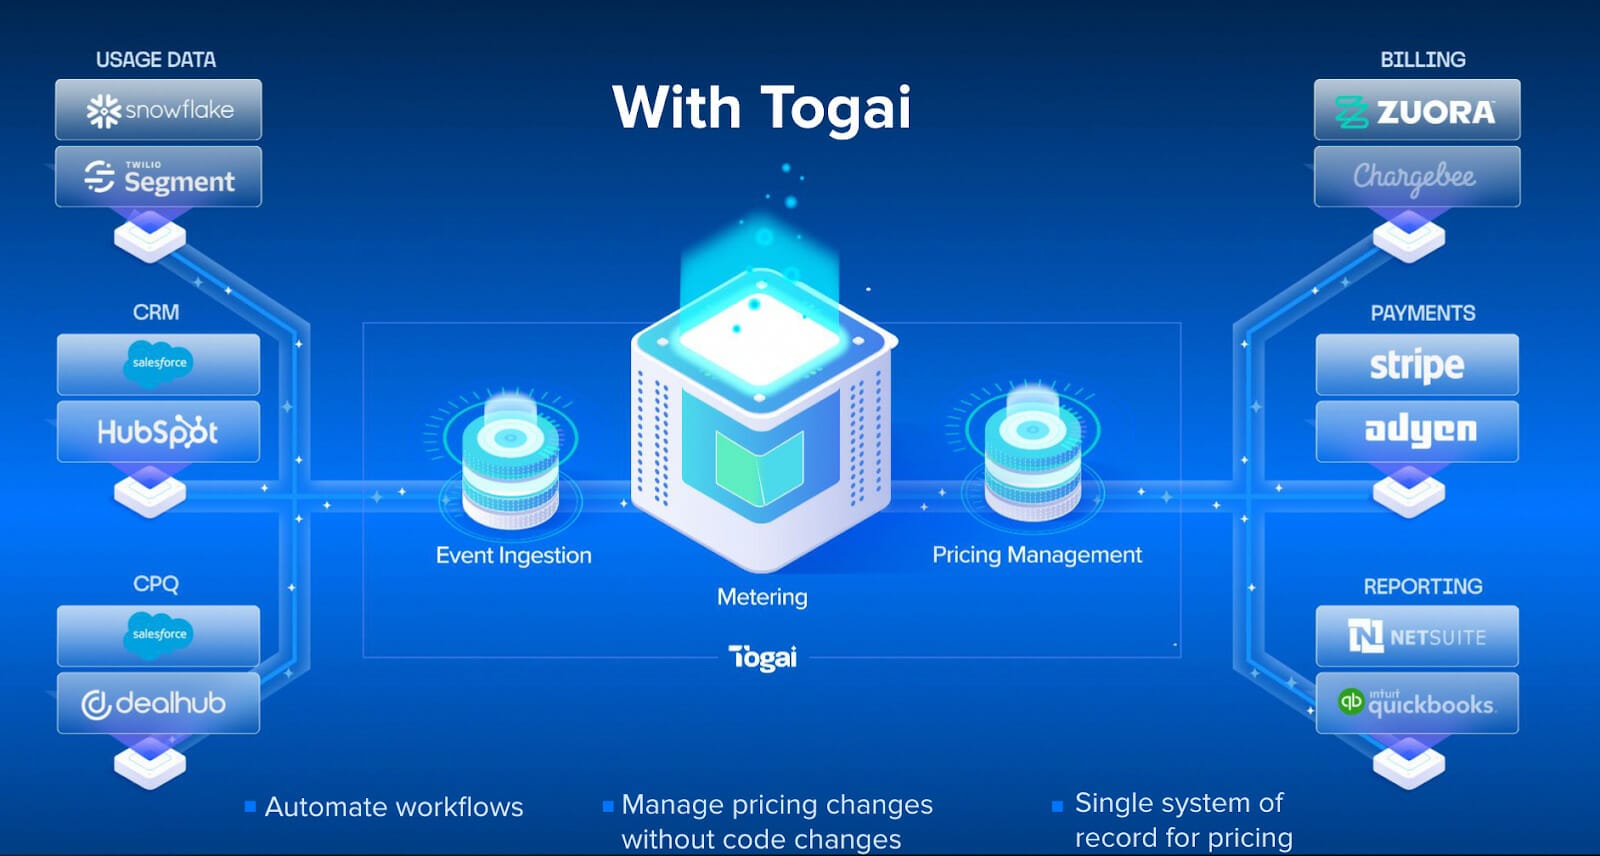 The image illustrates the reason for selecting Togai as the right enterprise billing software.